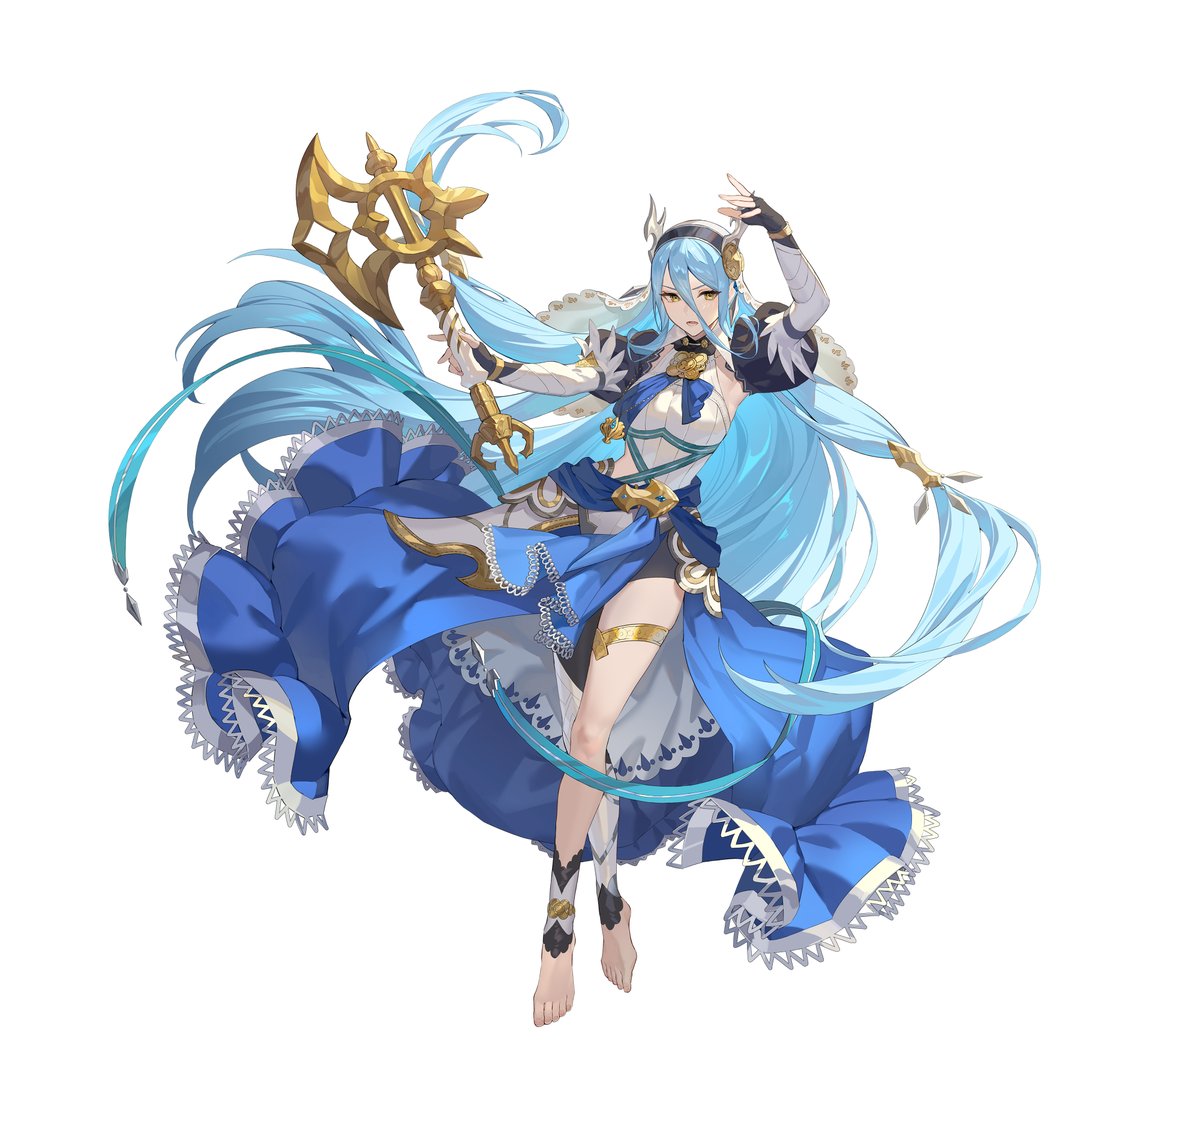 Meet Azura: Song's Reflection from the #FireEmblem Fates games. A princess of Nohr who was raised in Hoshido. Her song echoes across the battlefield, with her faith in Corrin granting her strength. #FEHeroes guide.fire-emblem-heroes.com/en-US/11001003…